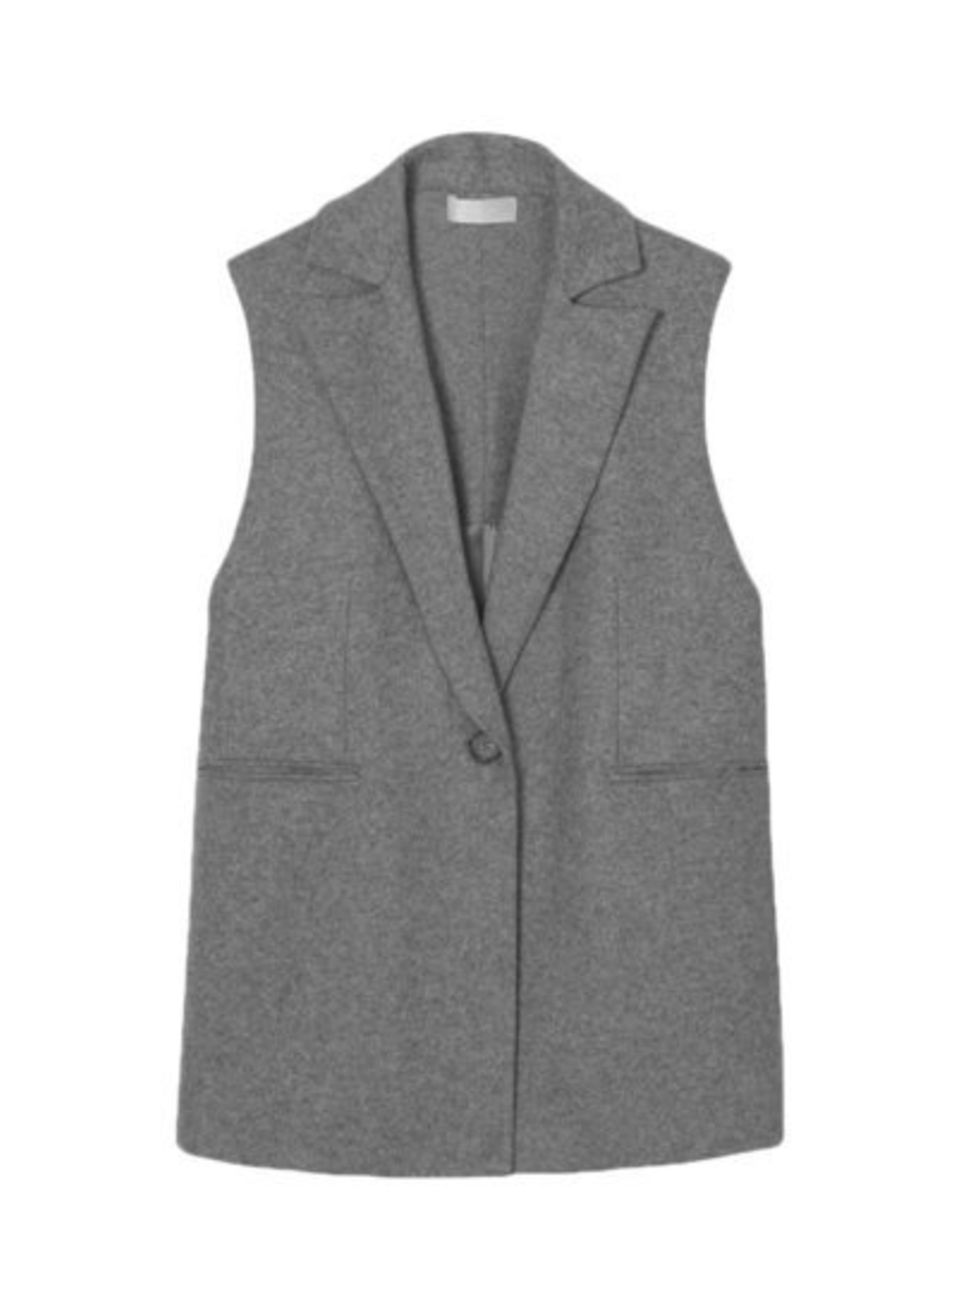 The perfect transitional piece. Layer over t-shirt dresses, jeans, knitwear...

Atea Oceanie waistcoat, £360